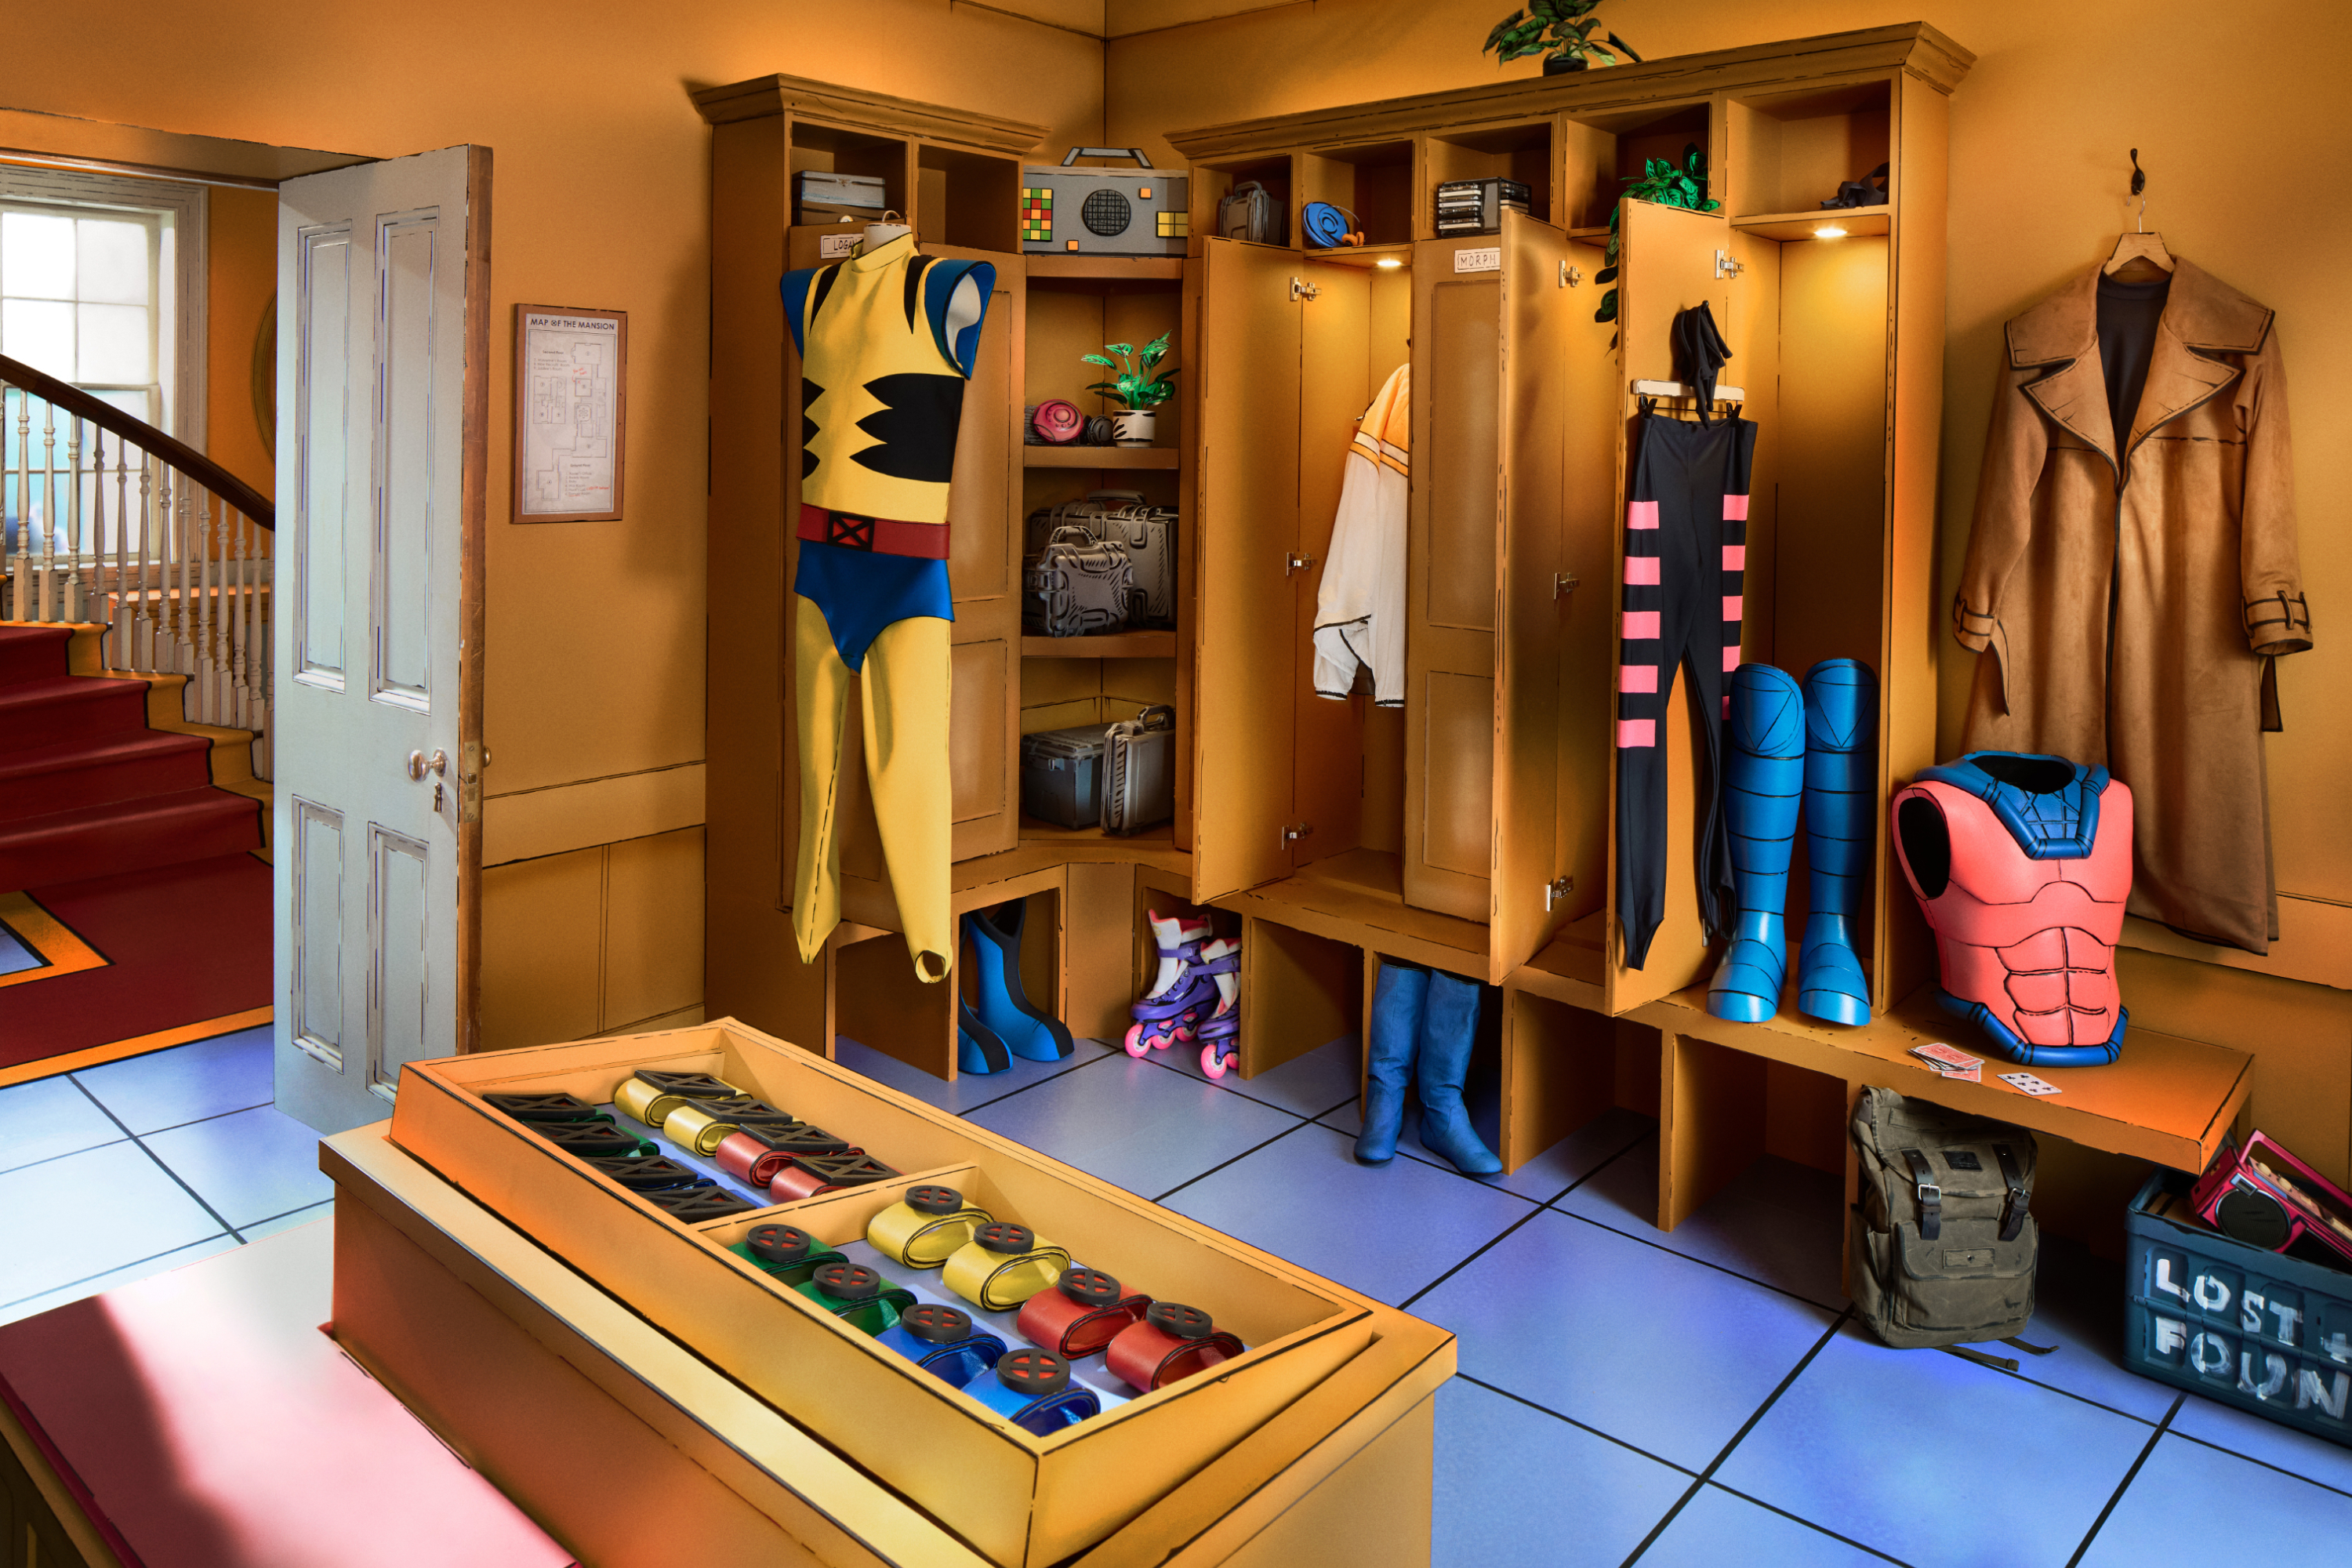 Lockers with superhero costumes and gadgets, a cape hanging on a door, and a trunk of masks on the floor